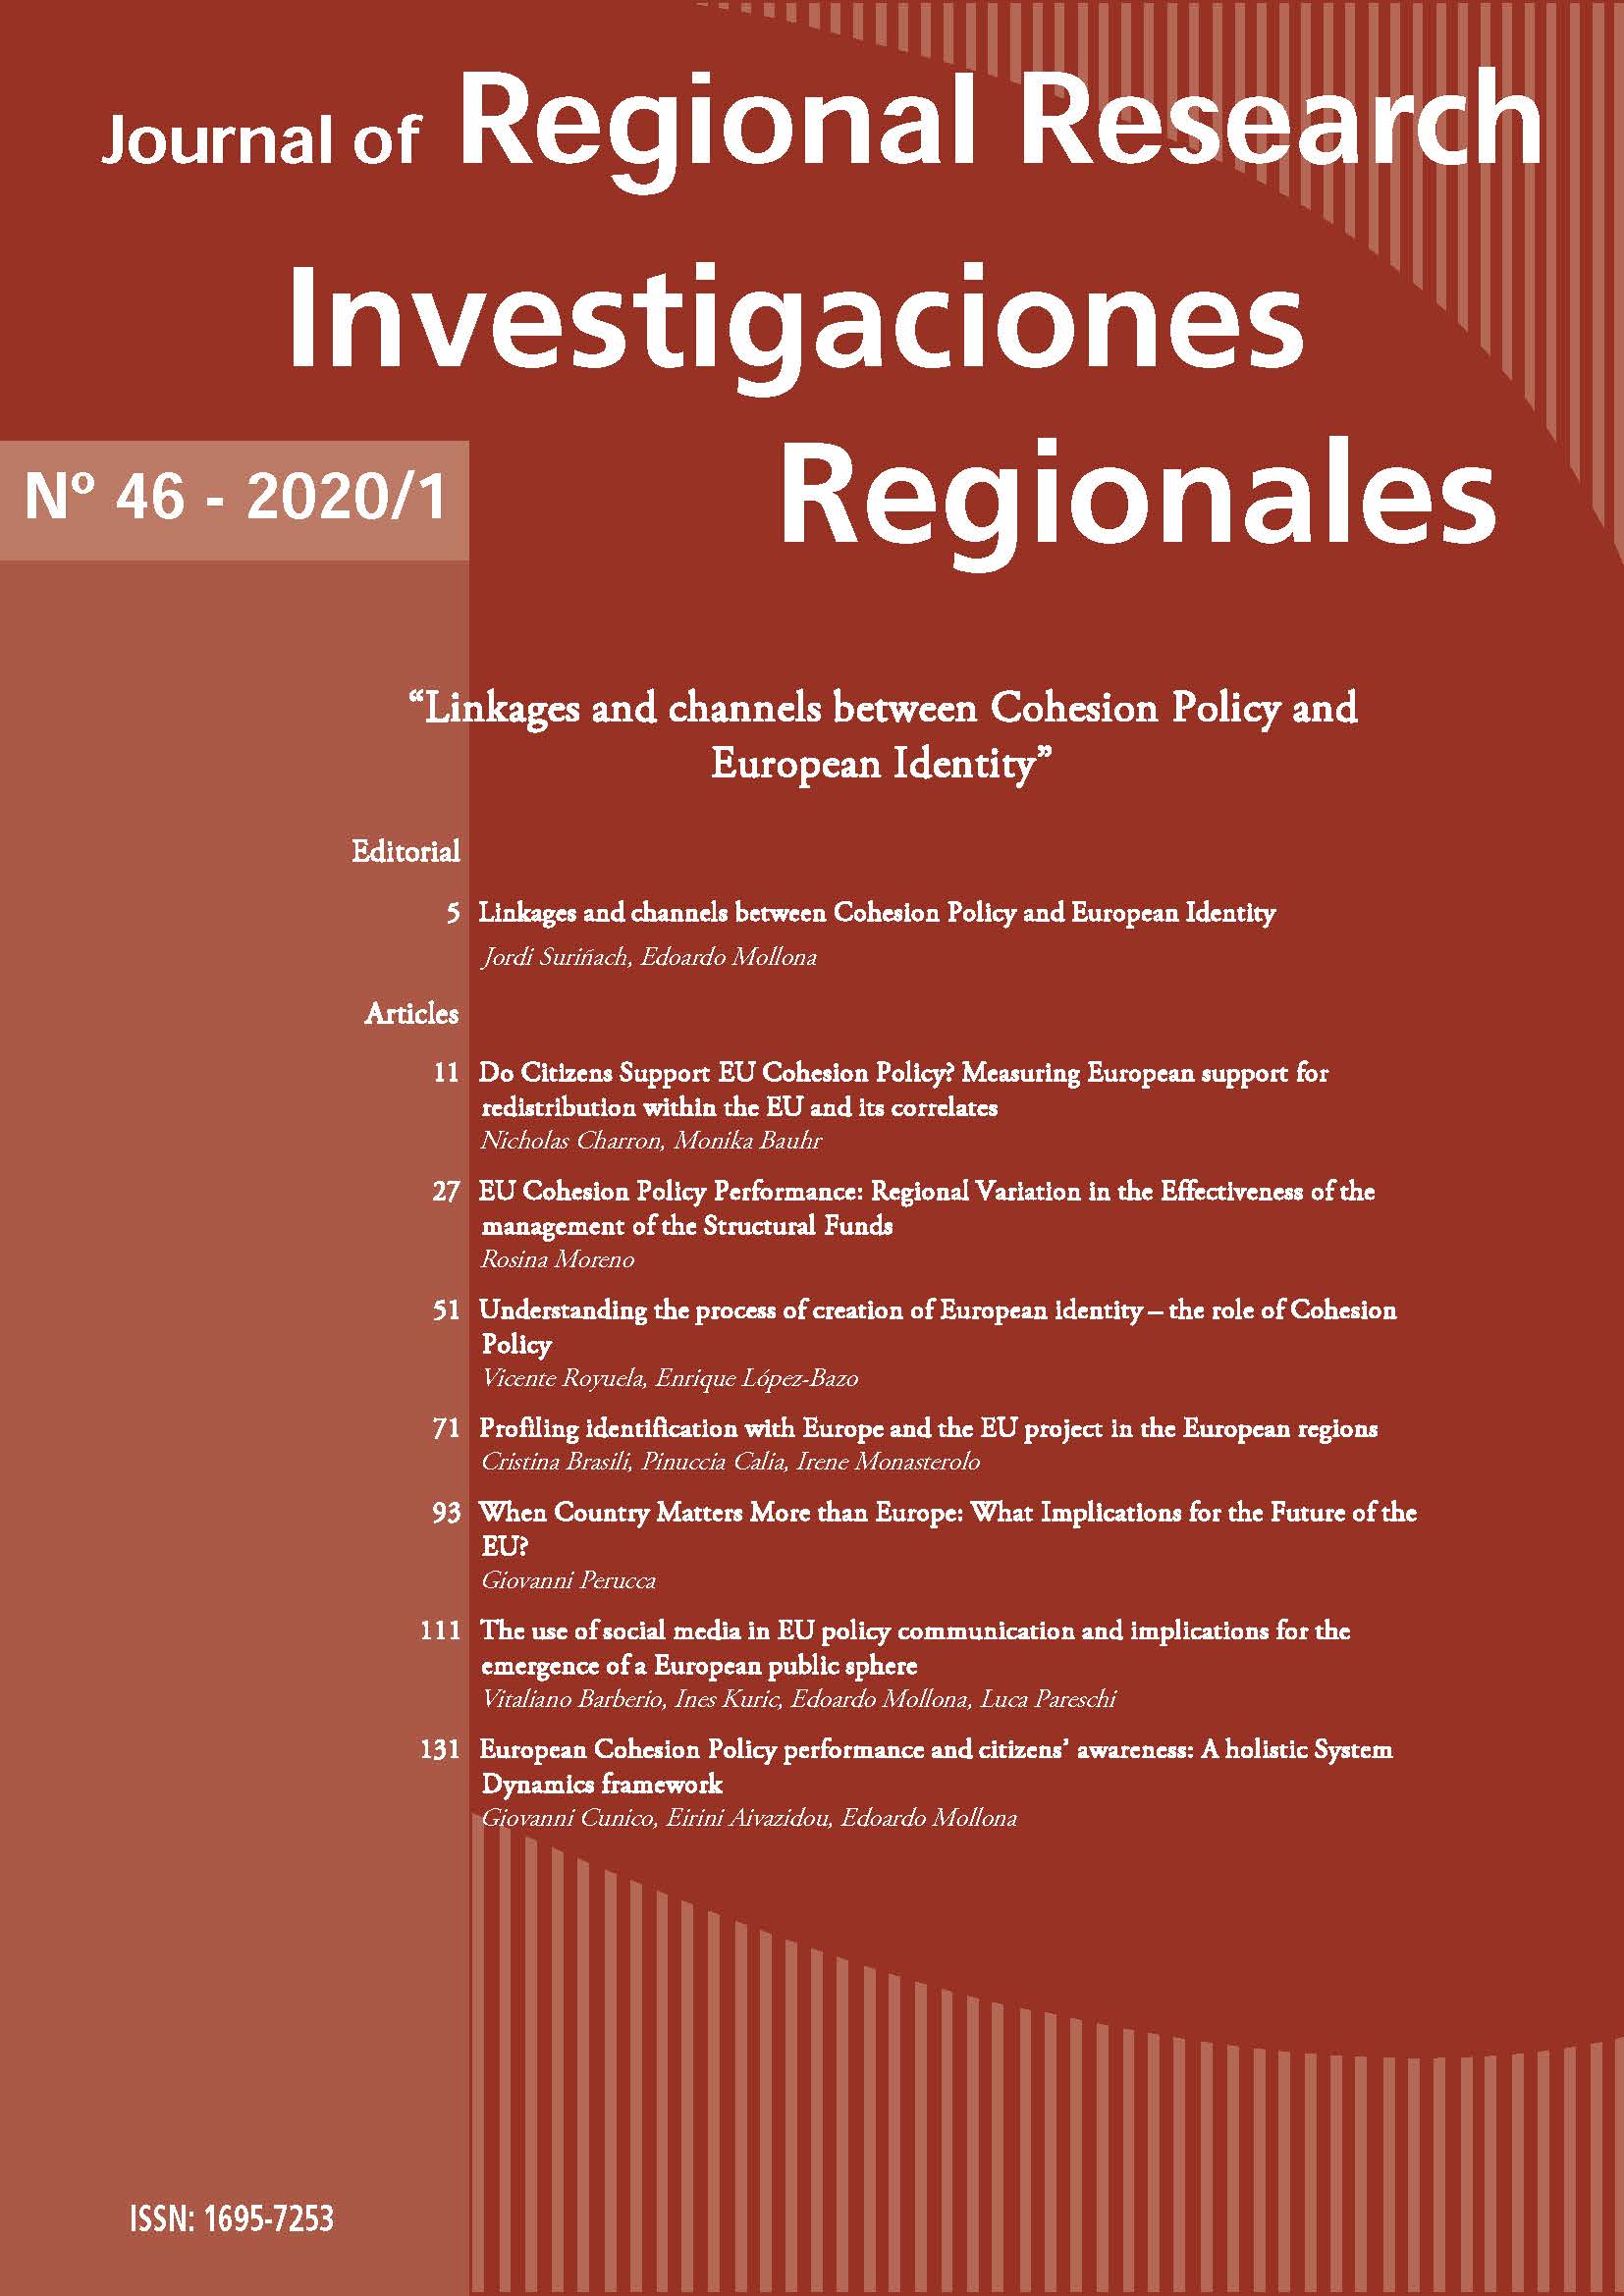 					Ver Vol. 46 (2020): Linkages and channels between Cohesion Policy and European Identity
				